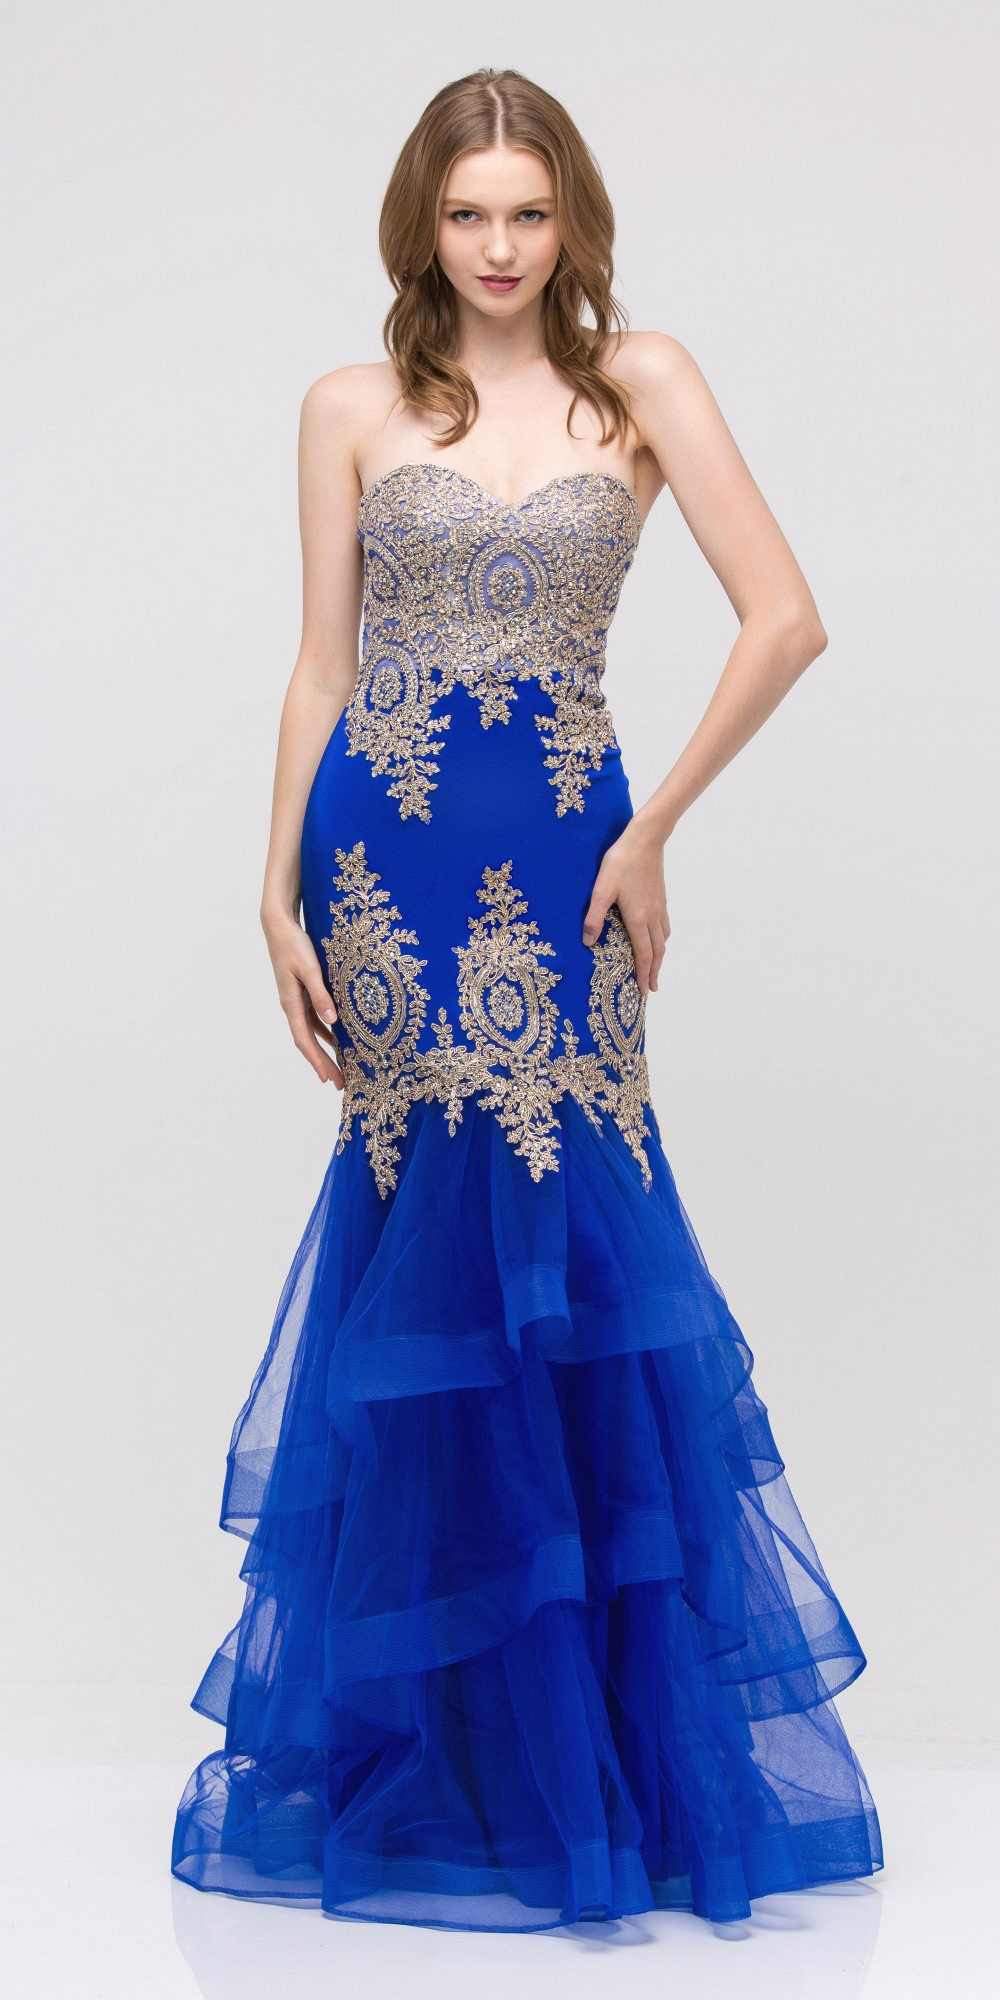 Eureka Fashion 6009 Strapless Embroidered Prom Gown Layered Skirt Sweetheart Neck Royal Blue